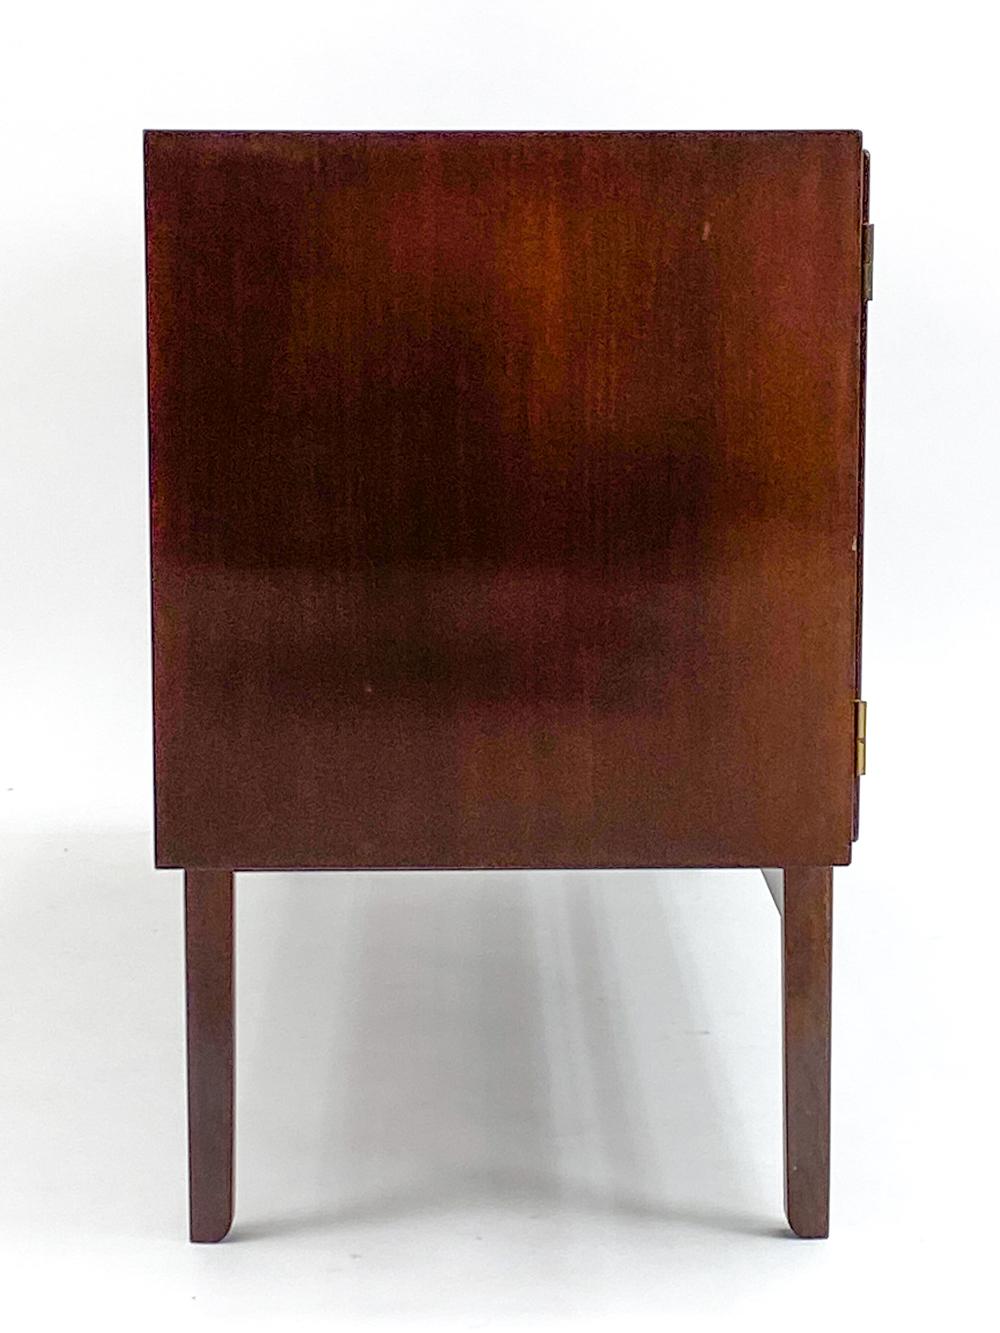 Ole Wanscher for Poul Jeppesen Rungstedlund Series Sideboard in Mahogany For Sale 7